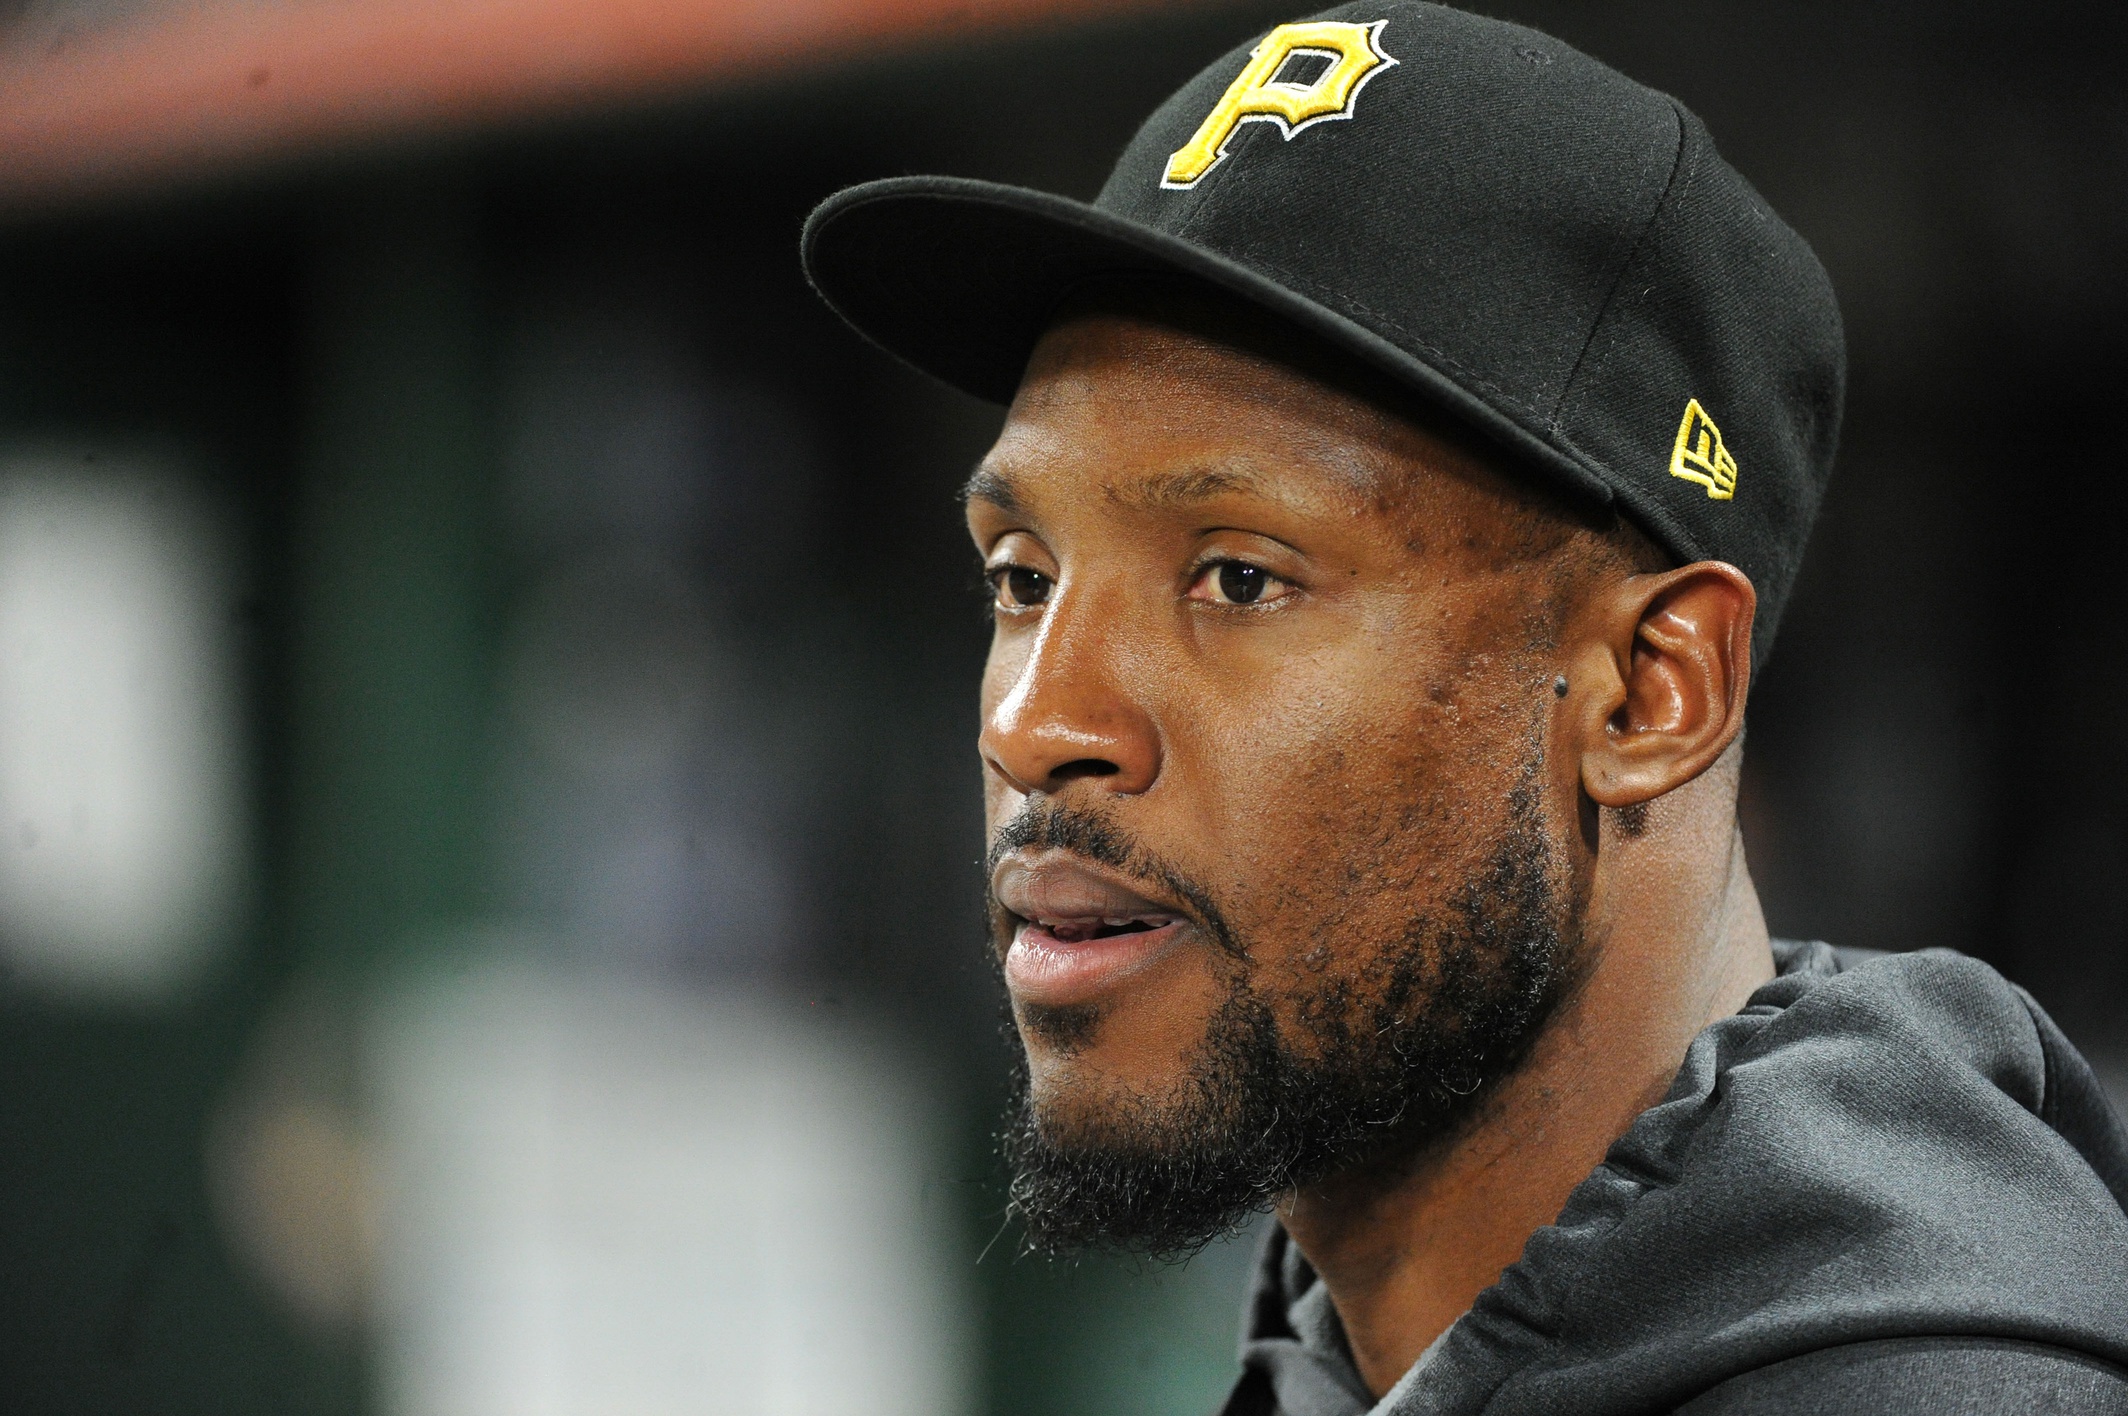 MLB star Starling Marte announces his wife has died of a heart attack